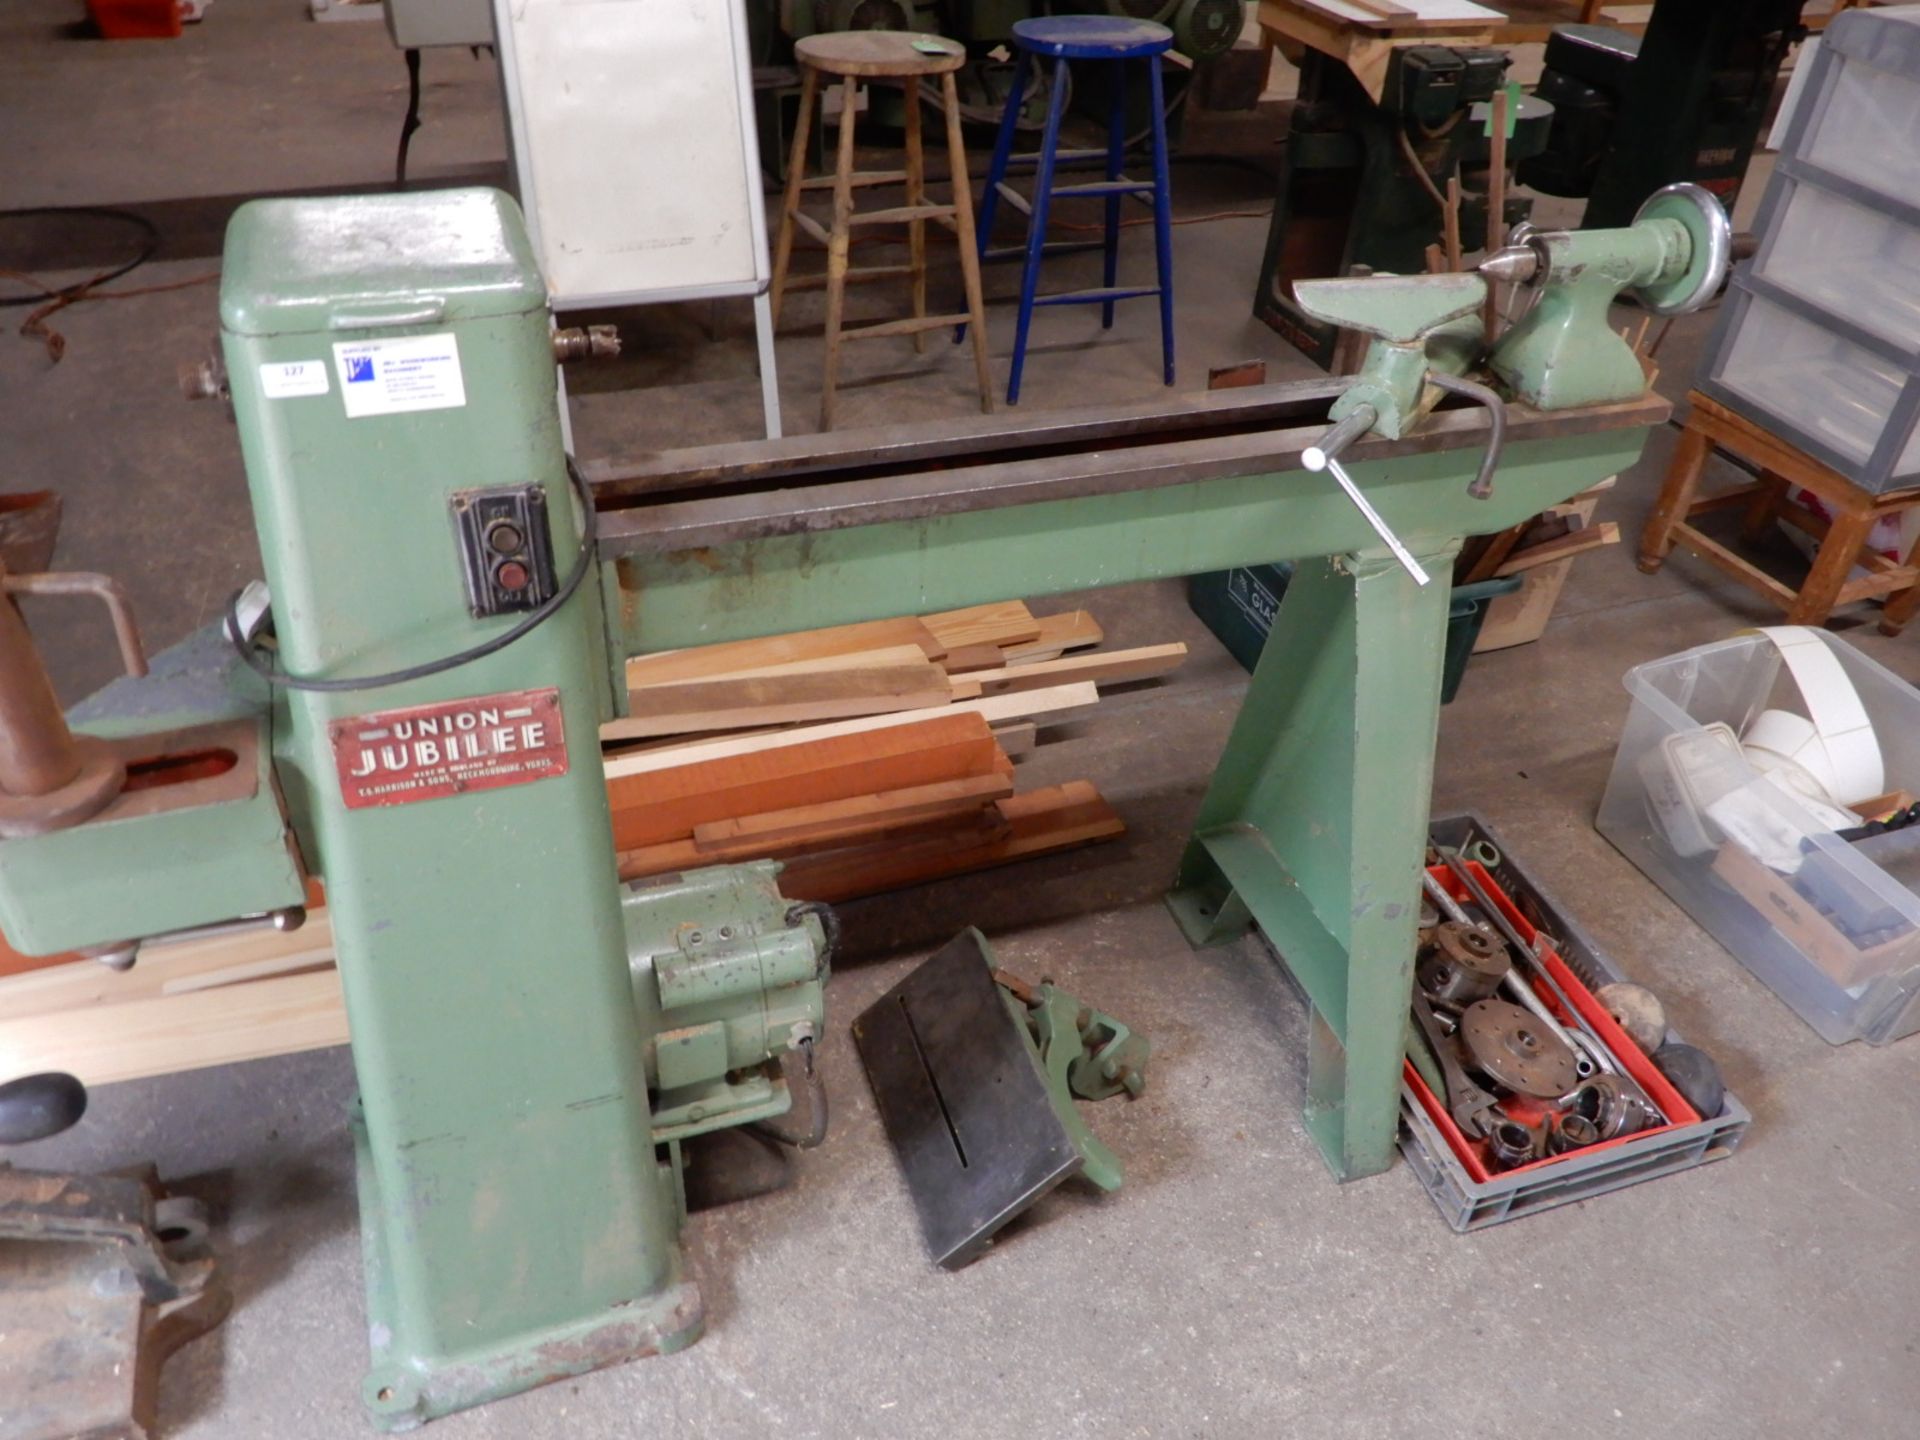 *Union Jubilee Wood Turning Lathe with Accessories